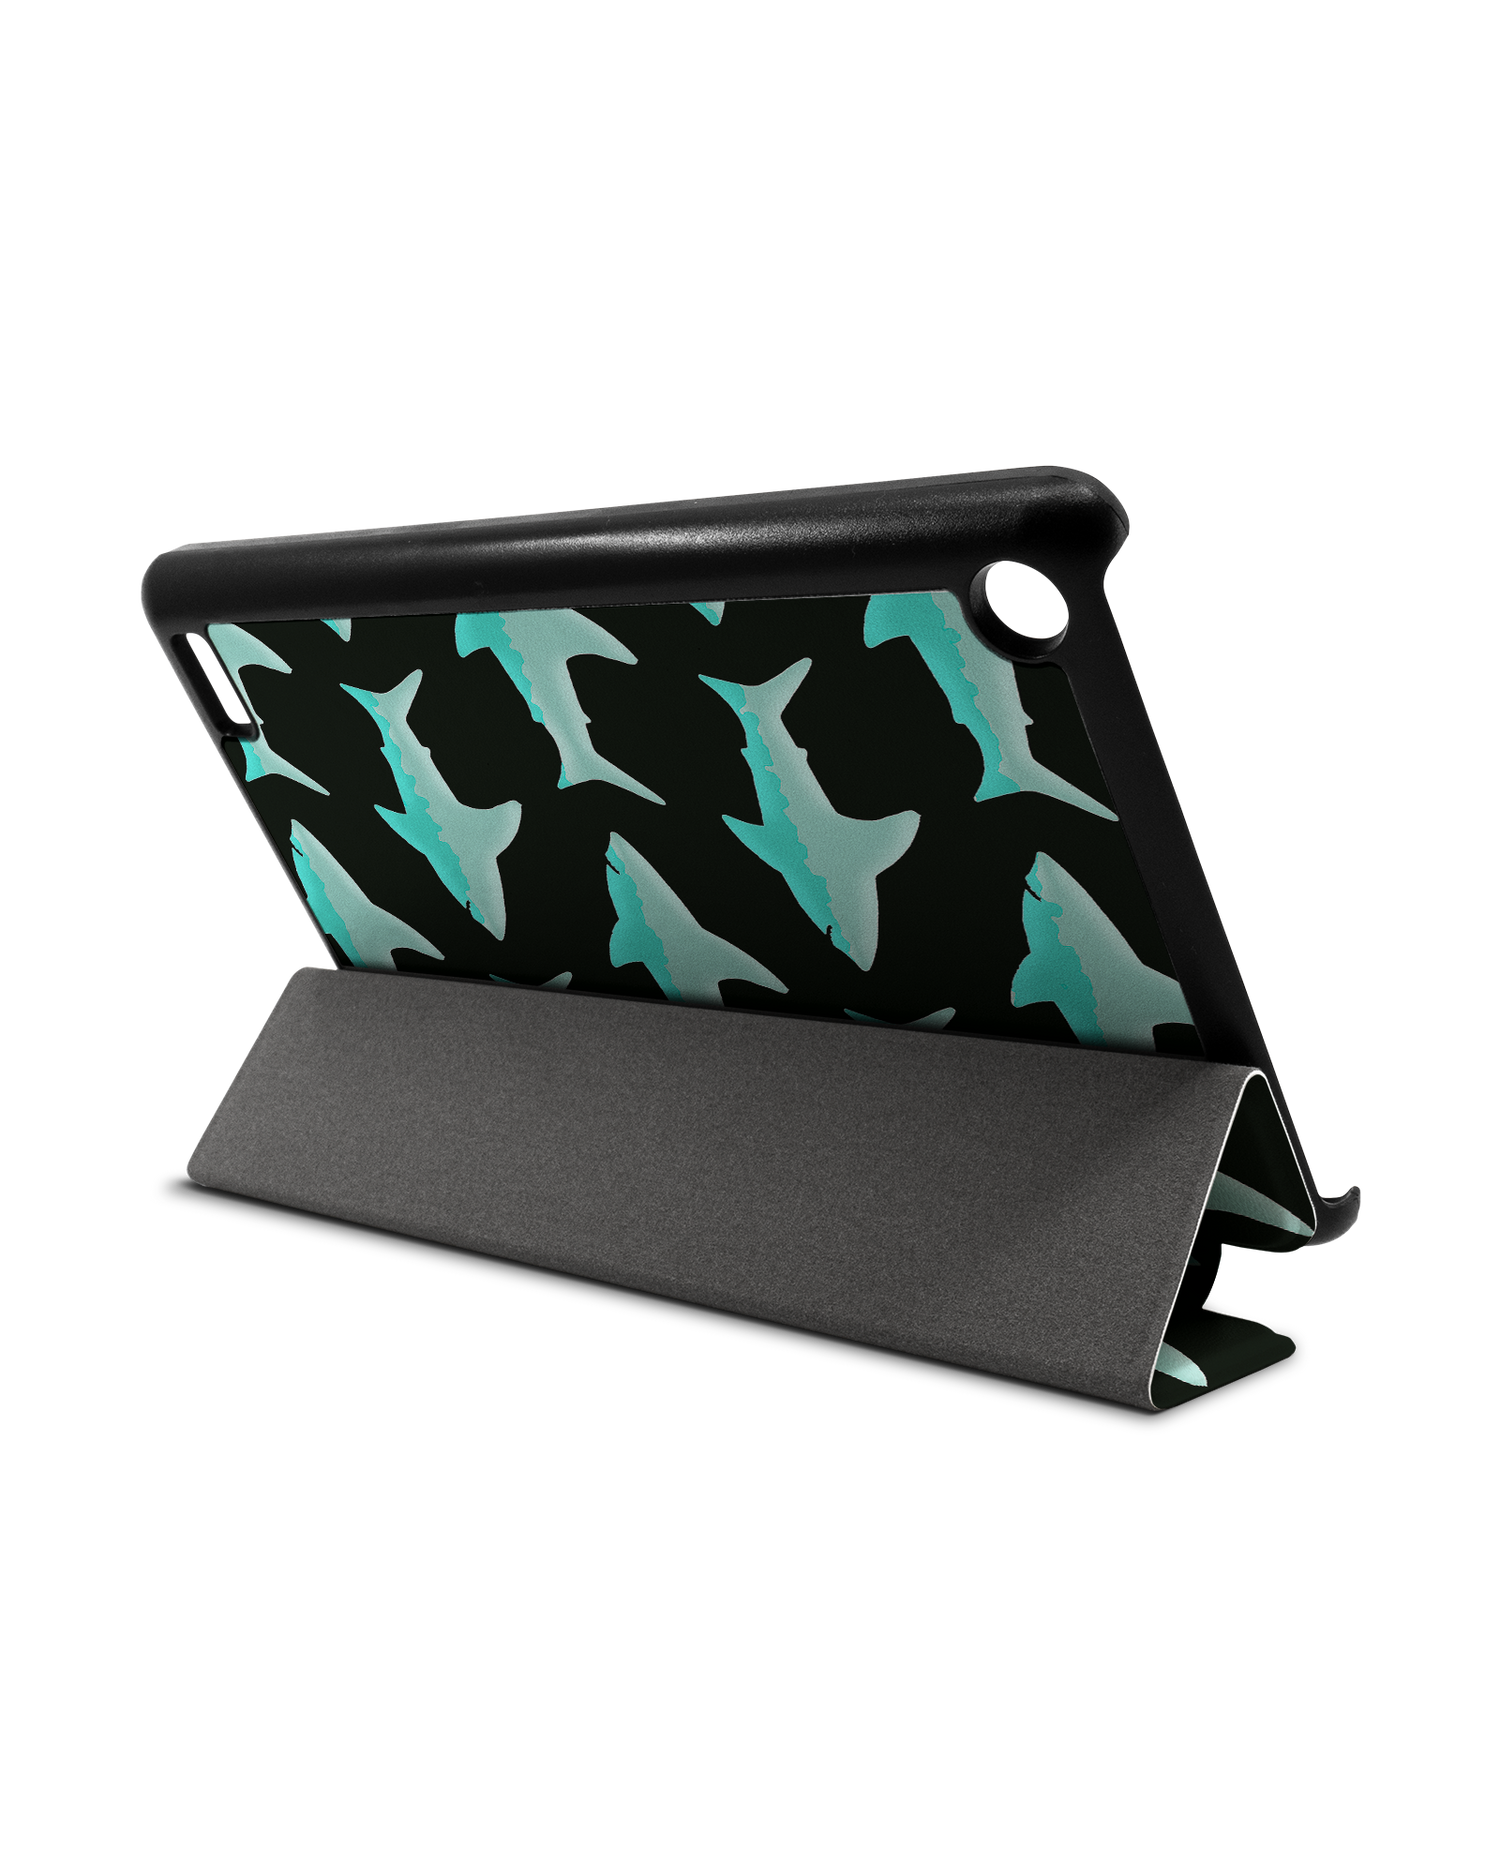 Neon Sharks Tablet Smart Case for Amazon Fire 7: Used as Stand